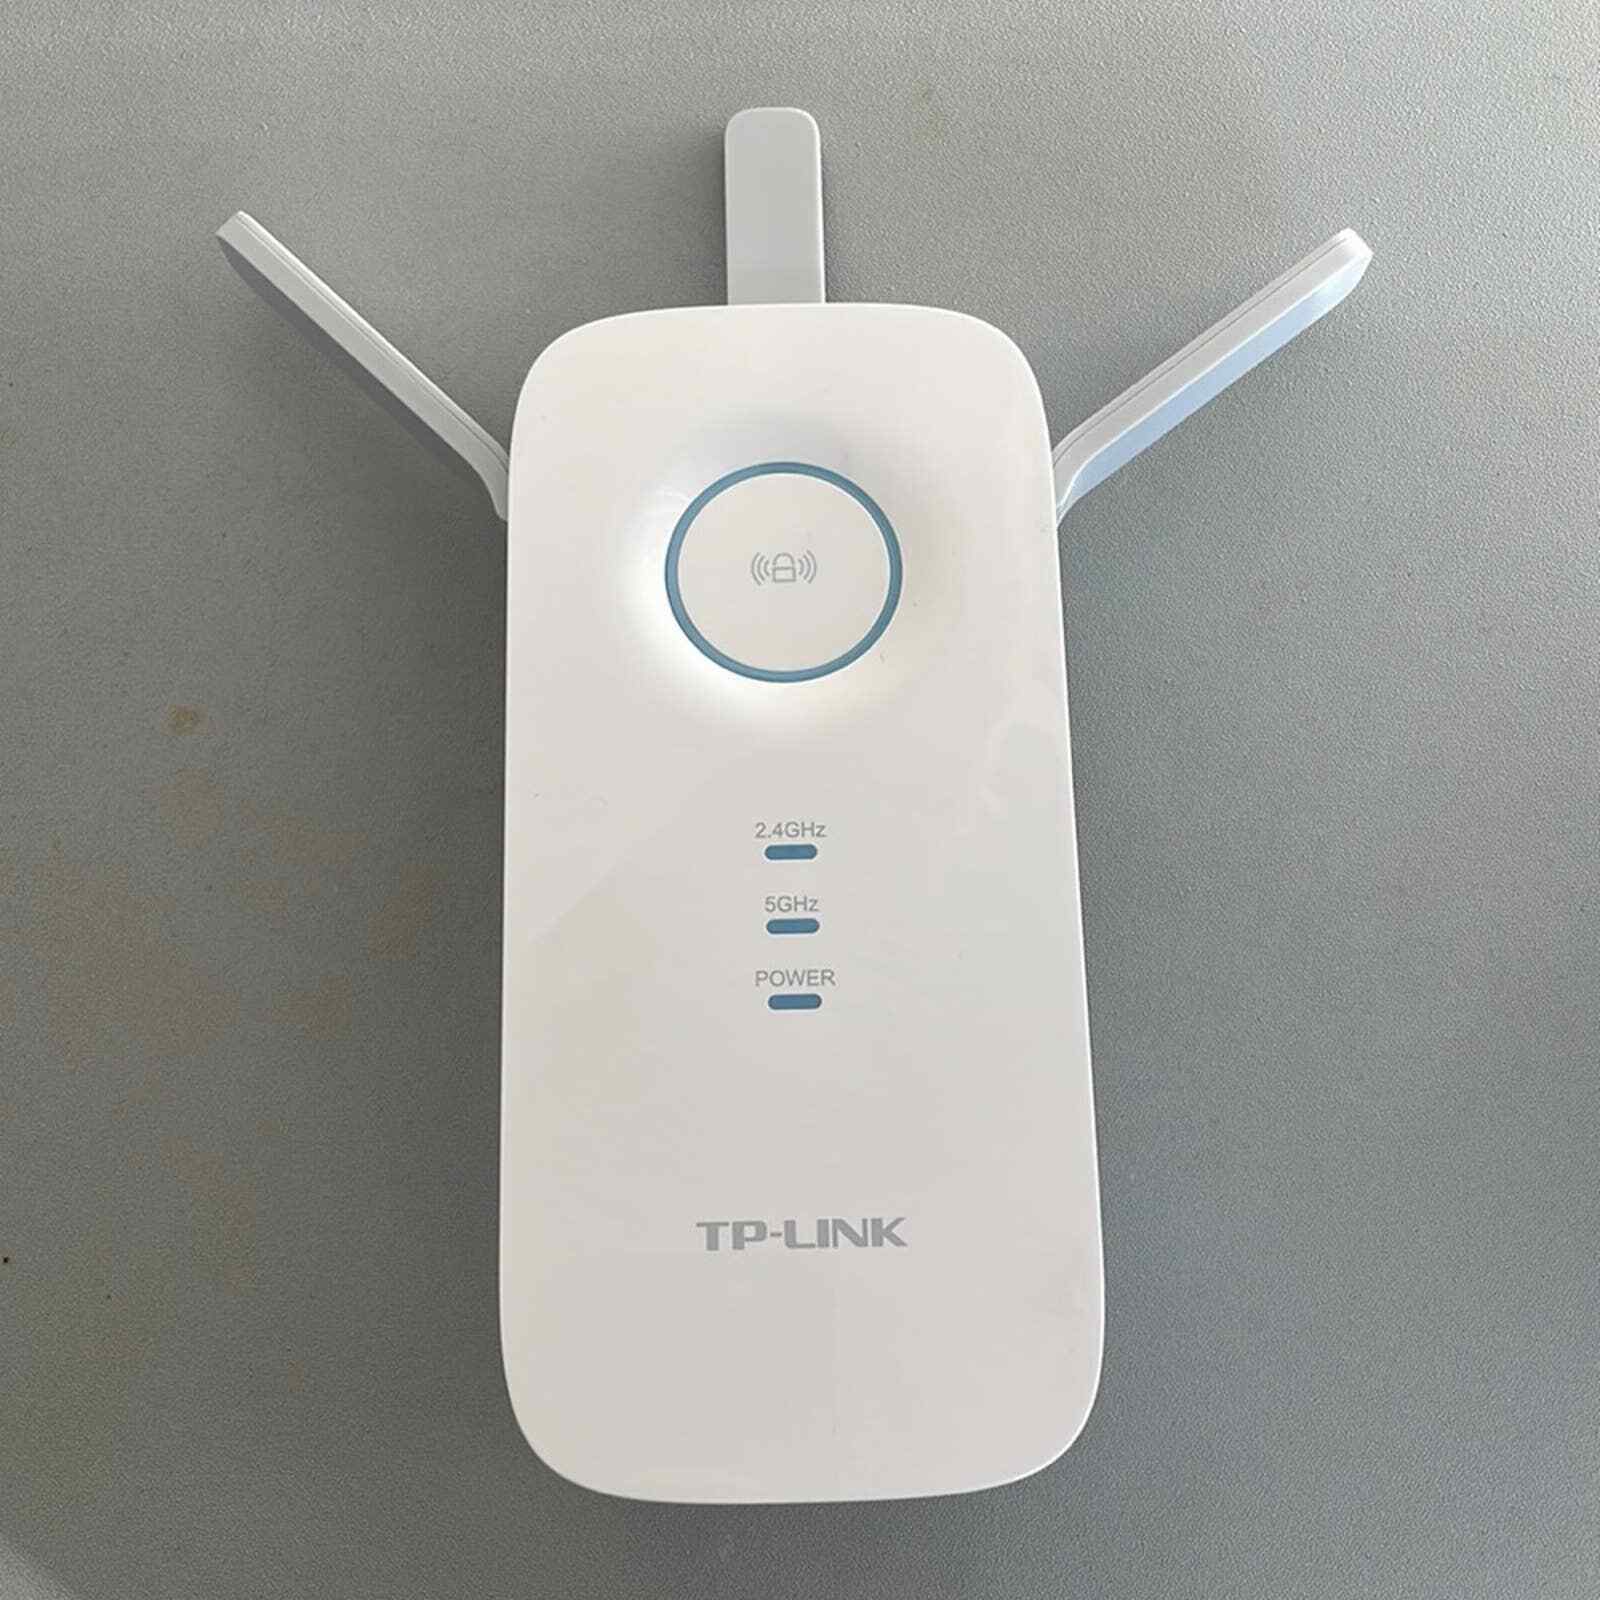 TP-LINK AC1750 Wi-Fi Range Extender Model RE450 📡Expand Your Wireless Network🚀